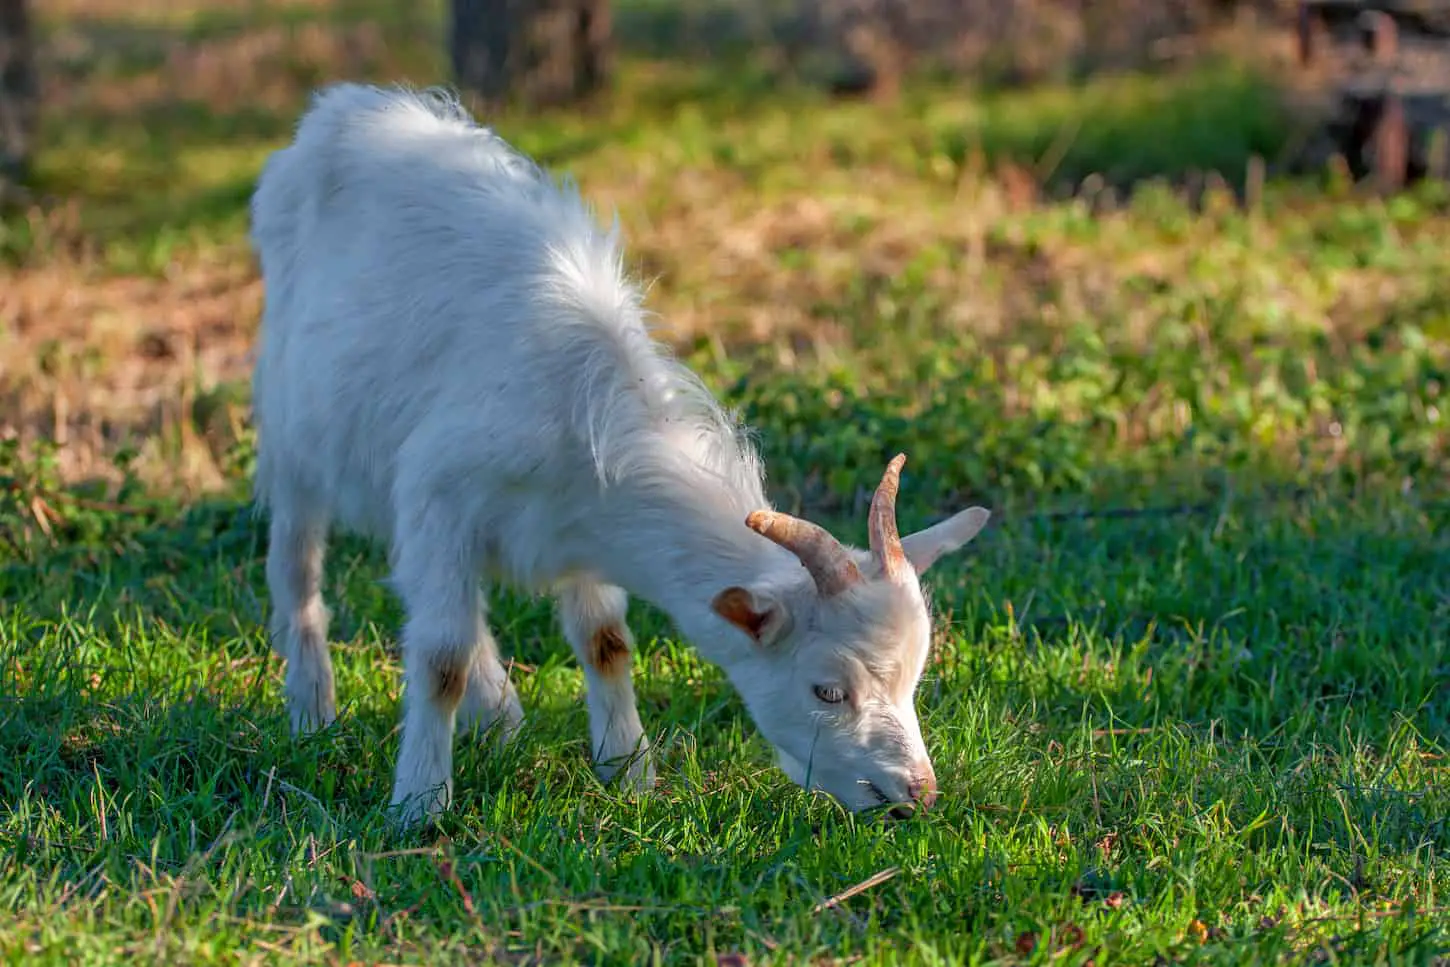 An image of a white goat eating grass in a farm field.